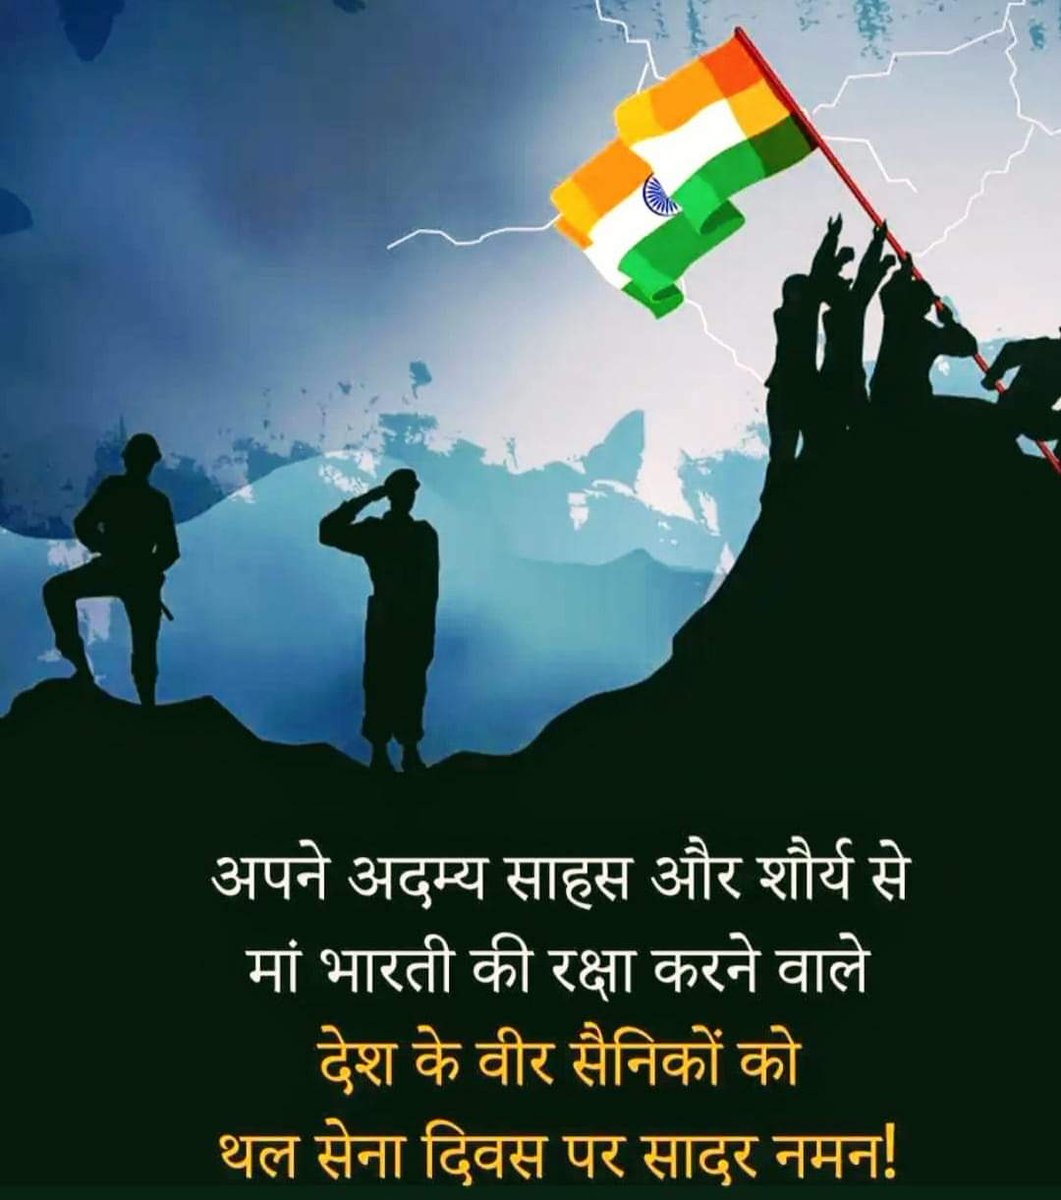 #ArmyDay2023 

Army Day
**************

Saluting the services and sacrifices of all men and women in uniform on Army Day.
Wishing you success in all your endeavours.
Jai Hind 🇮🇳🇮🇳
Jai Hind ki Sena.🇮🇳🇮🇳
🌹🌹🌹🌹🌹🌹🌹🌹🌹🌹🌹🌹🌹